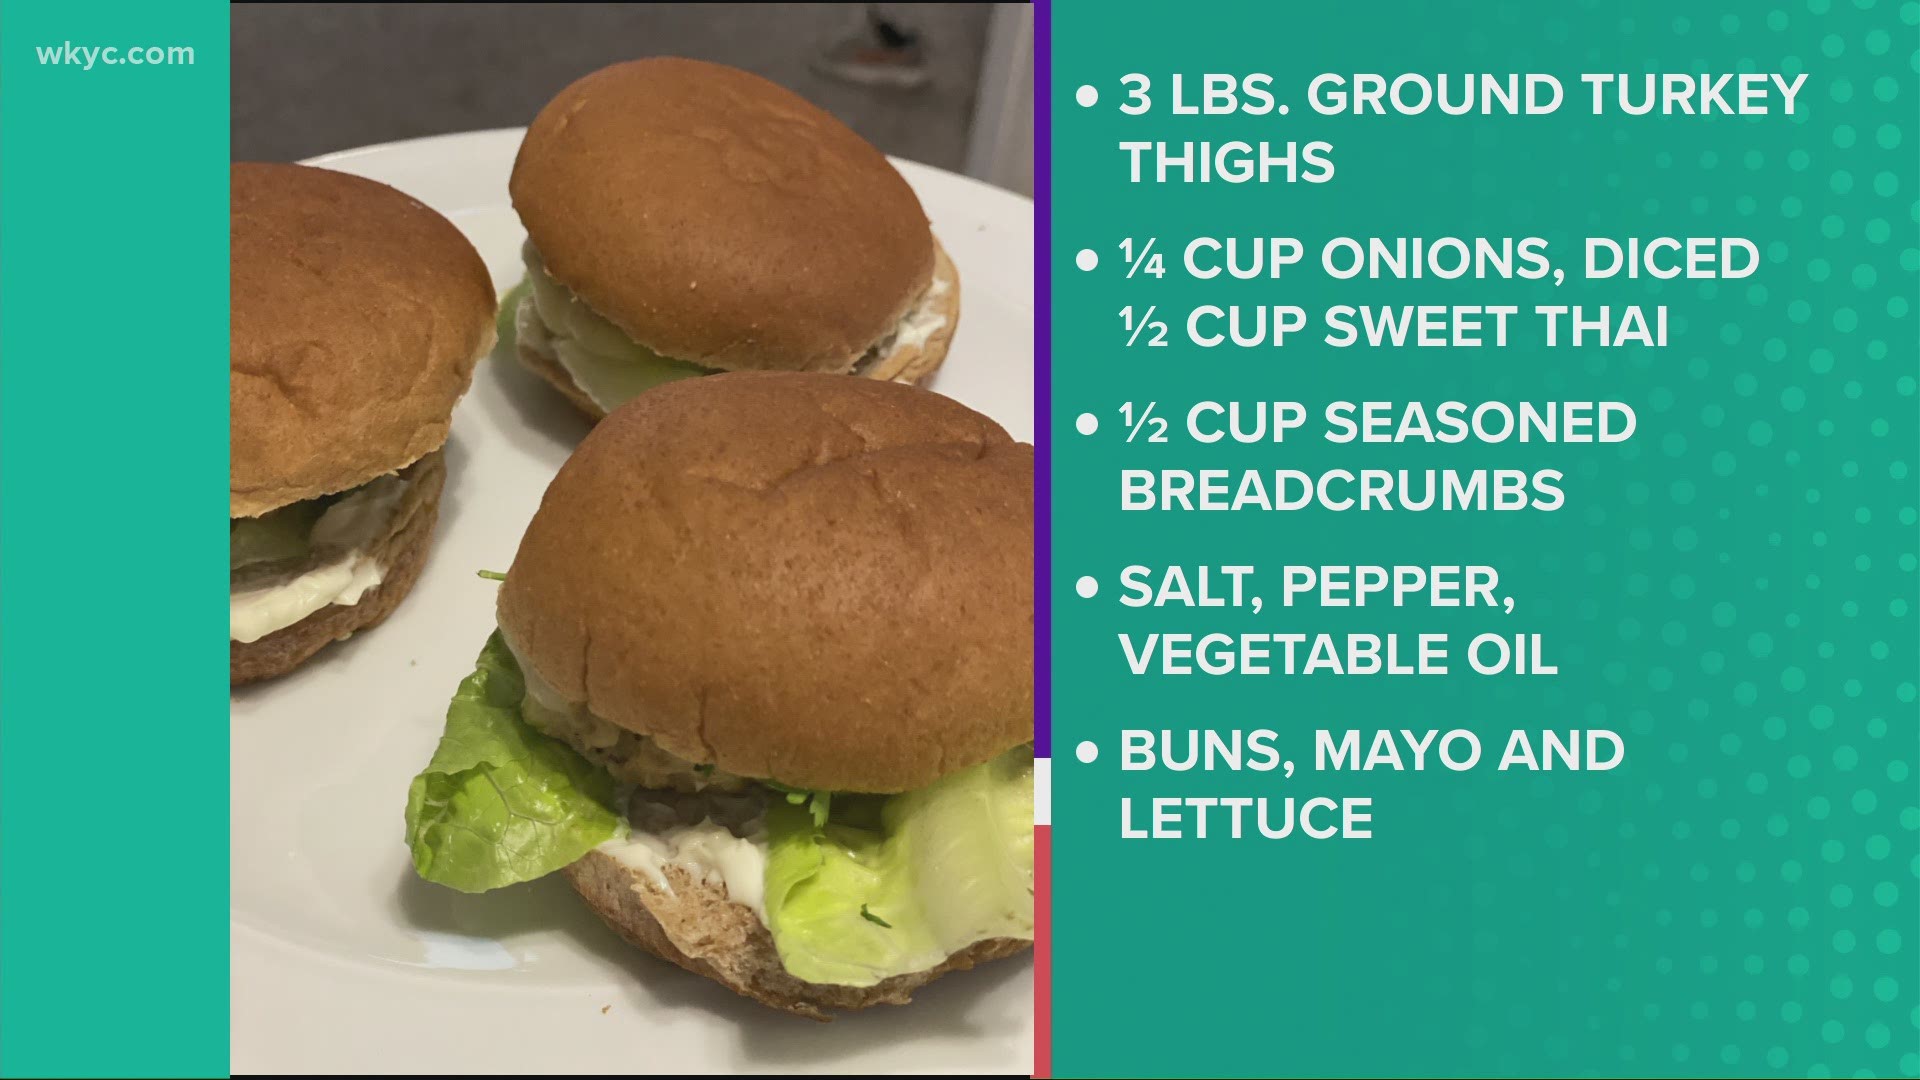 Sept. 13, 2020: It's game day! That means football food! Chef Eric Wells shares his simple recipe for ground turkey sliders. Yum!